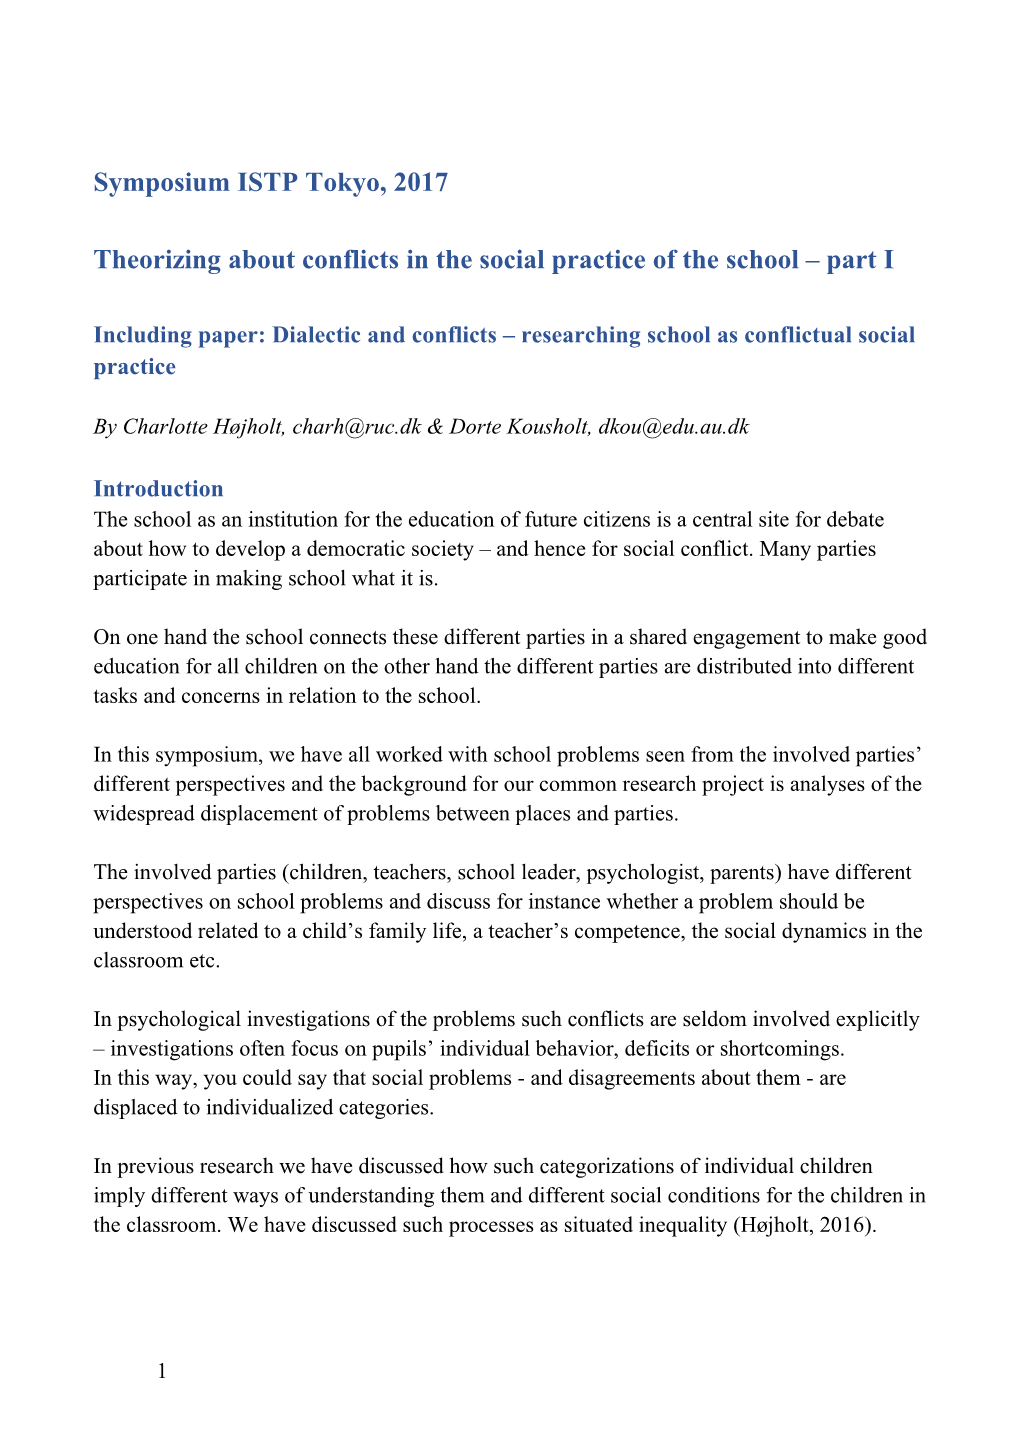 Theorizing About Conflicts in the Social Practice of the School Part I